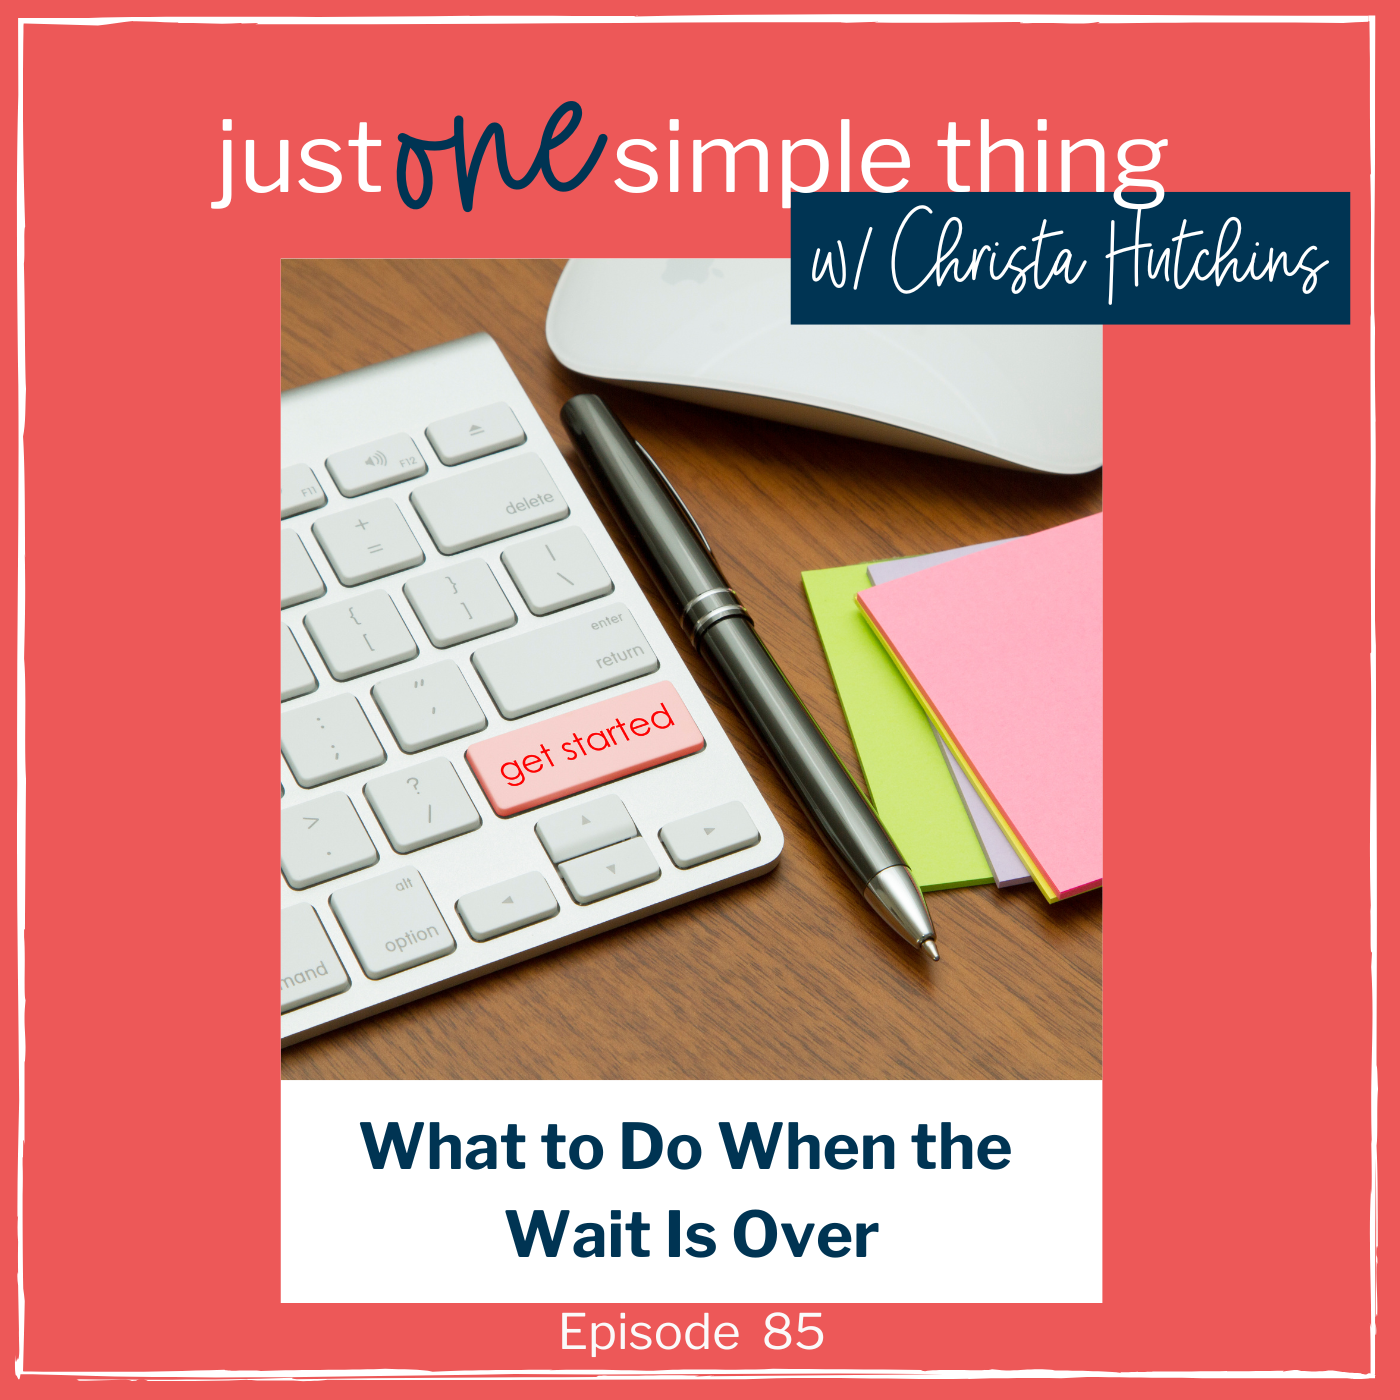 How to get started when the wait is over